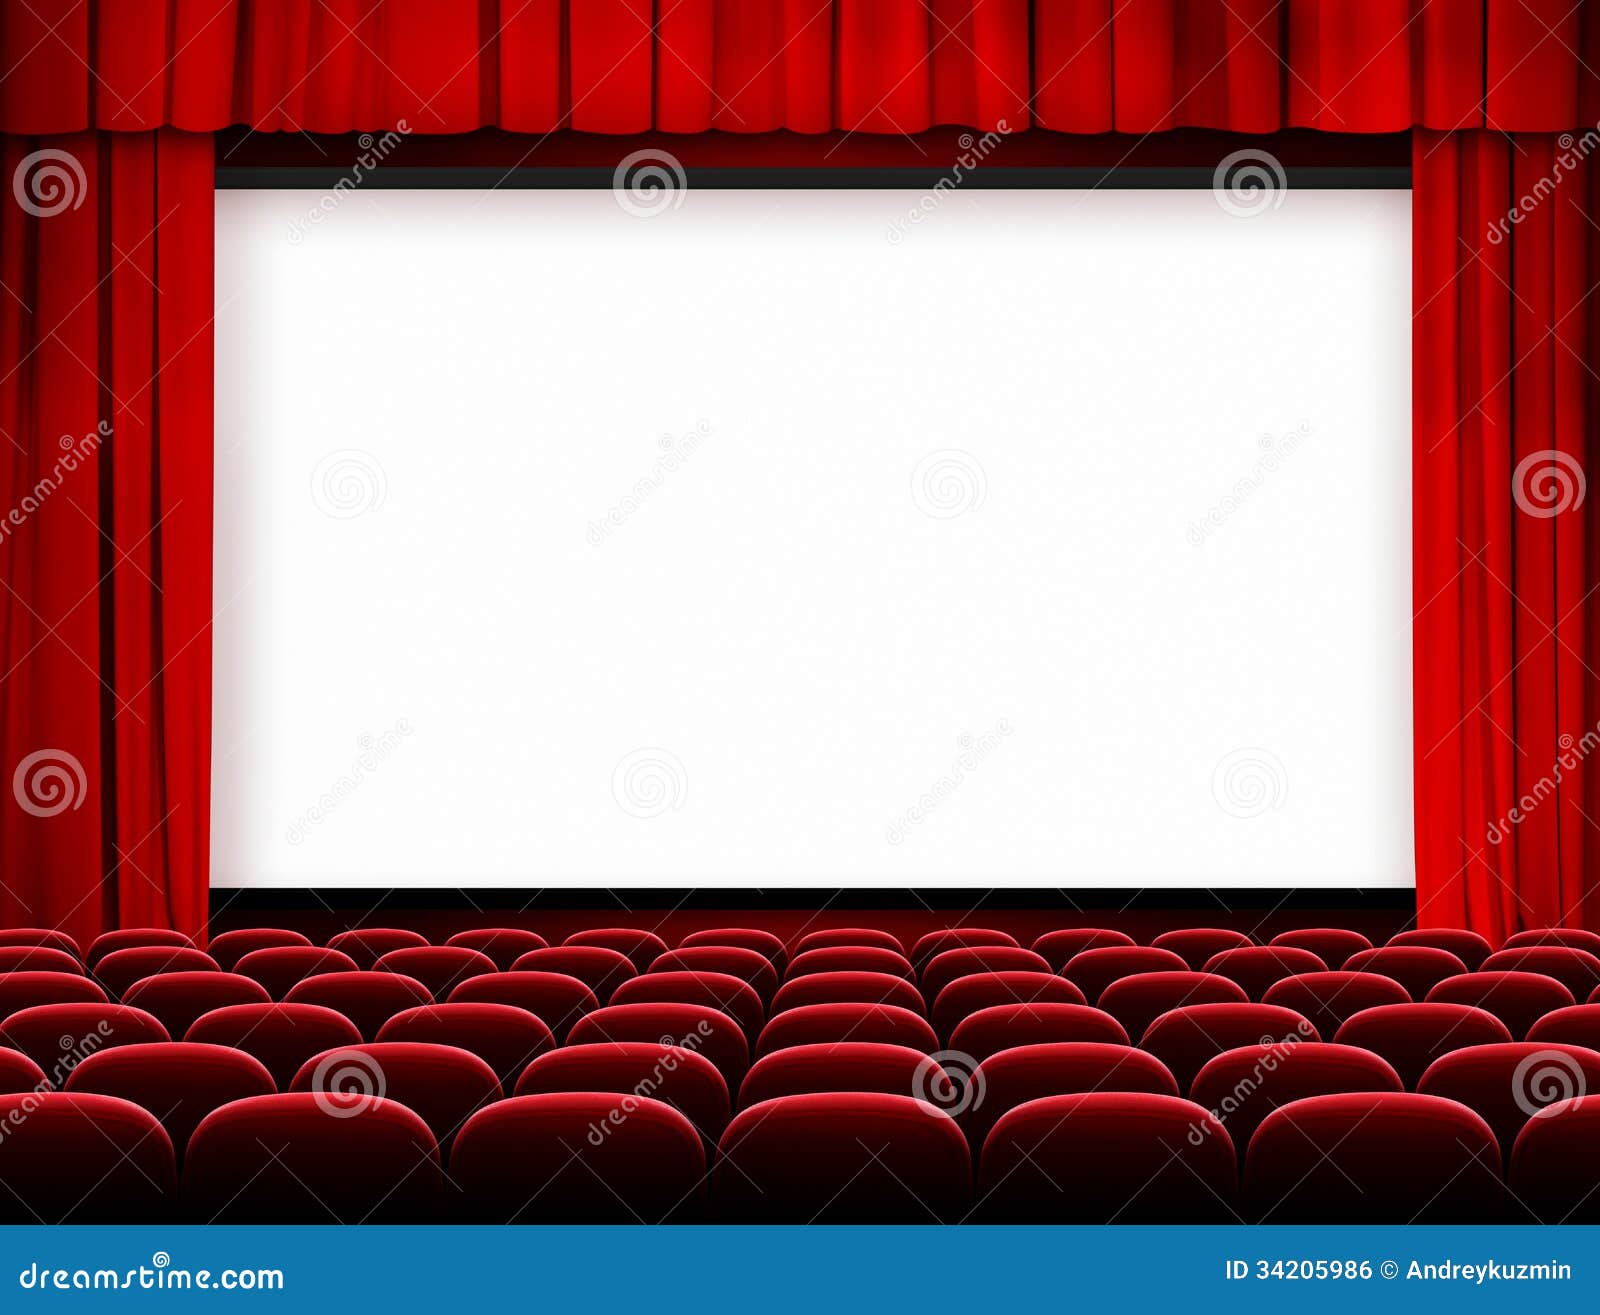 cinema screen red curtains seats 34205986